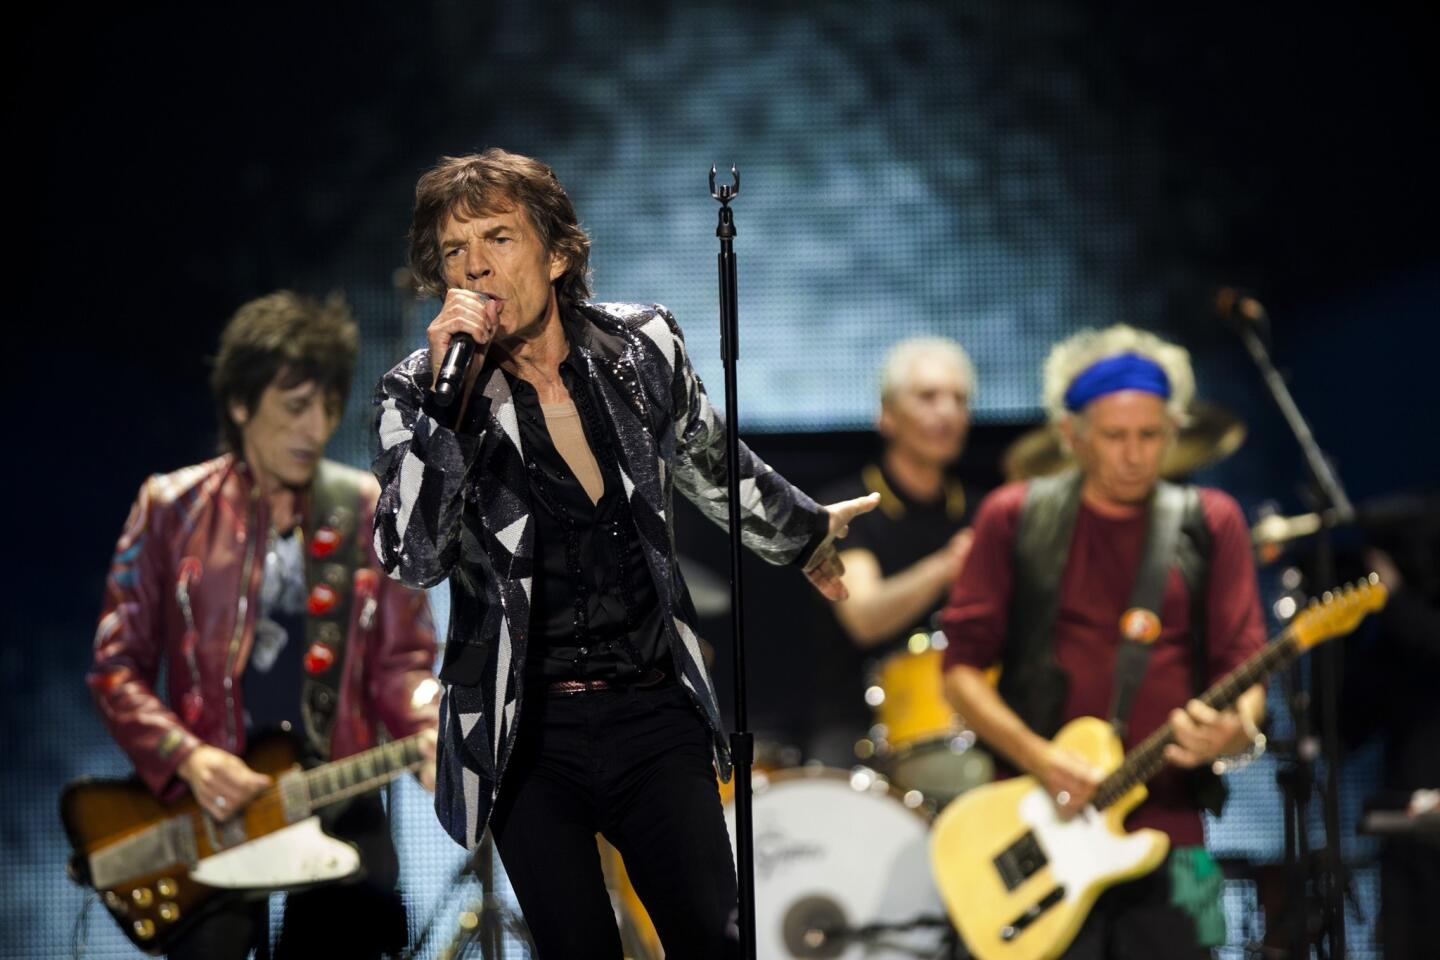 The Rolling Stones' first U.S. tour